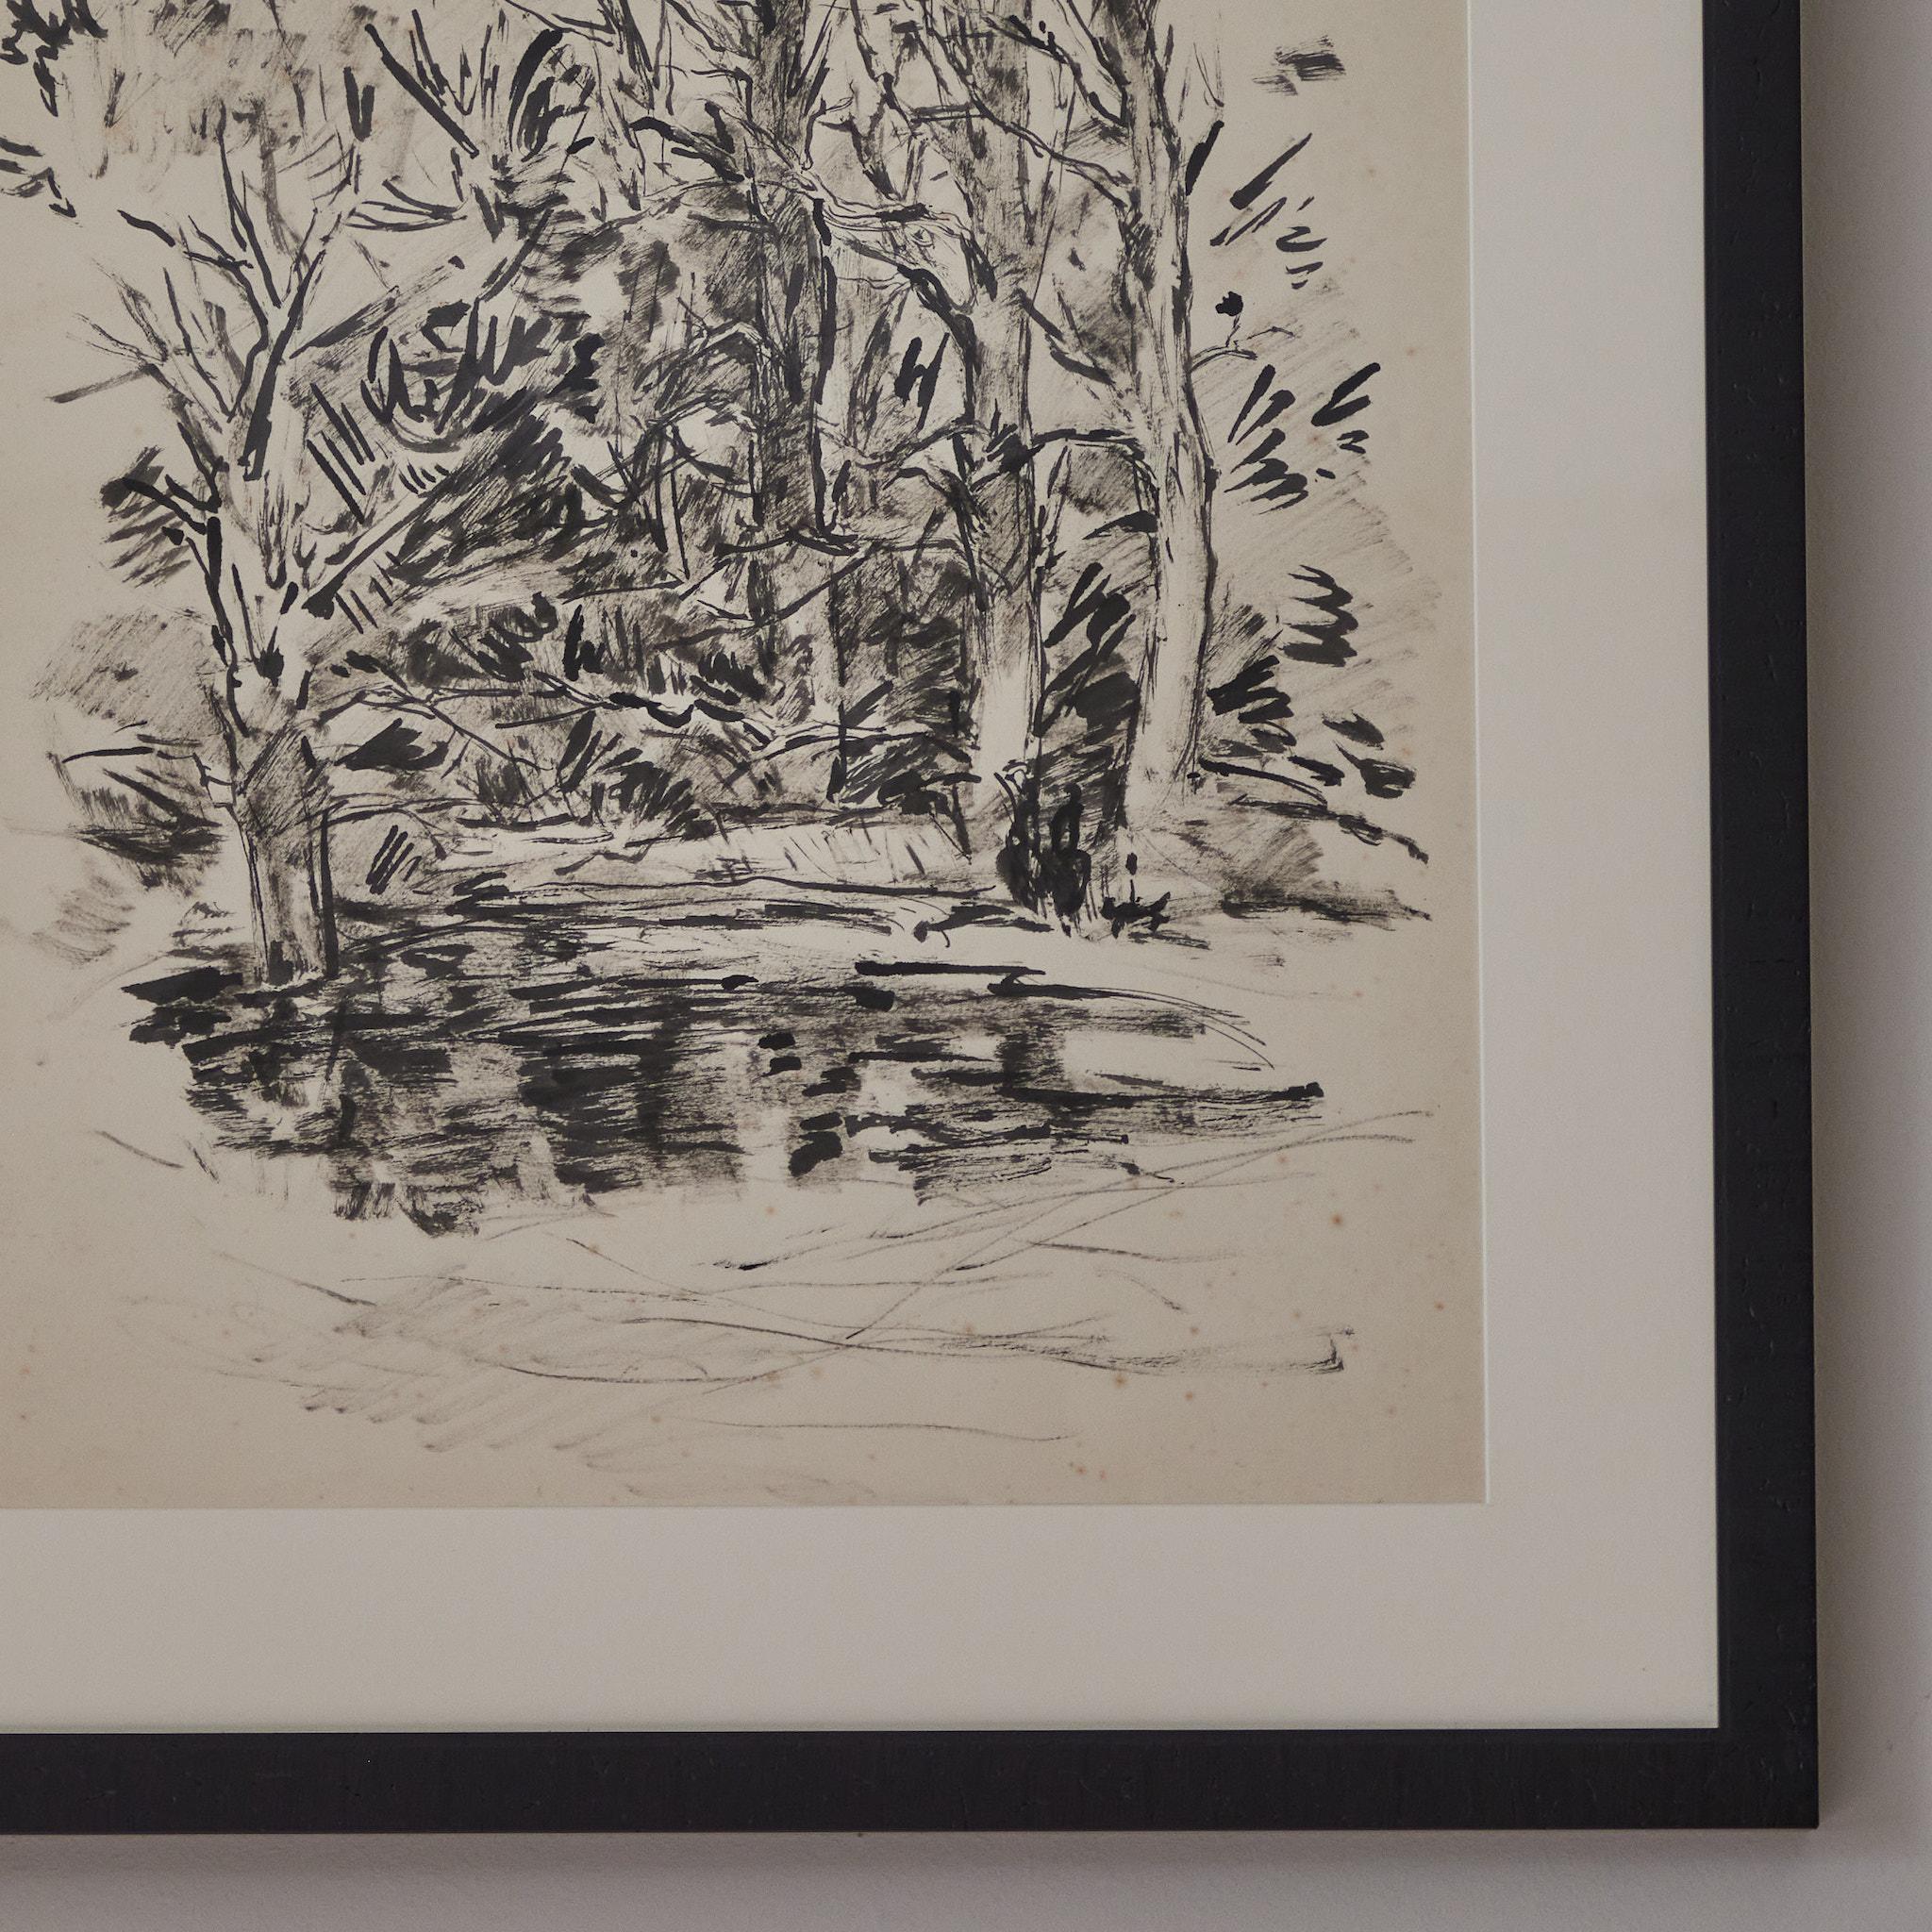 French post-Impressionist style black ink drawing on paper of a winter wood scene. The landscape has been mounted in a contemporary black wood frame. Brushy and gestural, the artist seems to relish in the interlocking patterns of nature. 